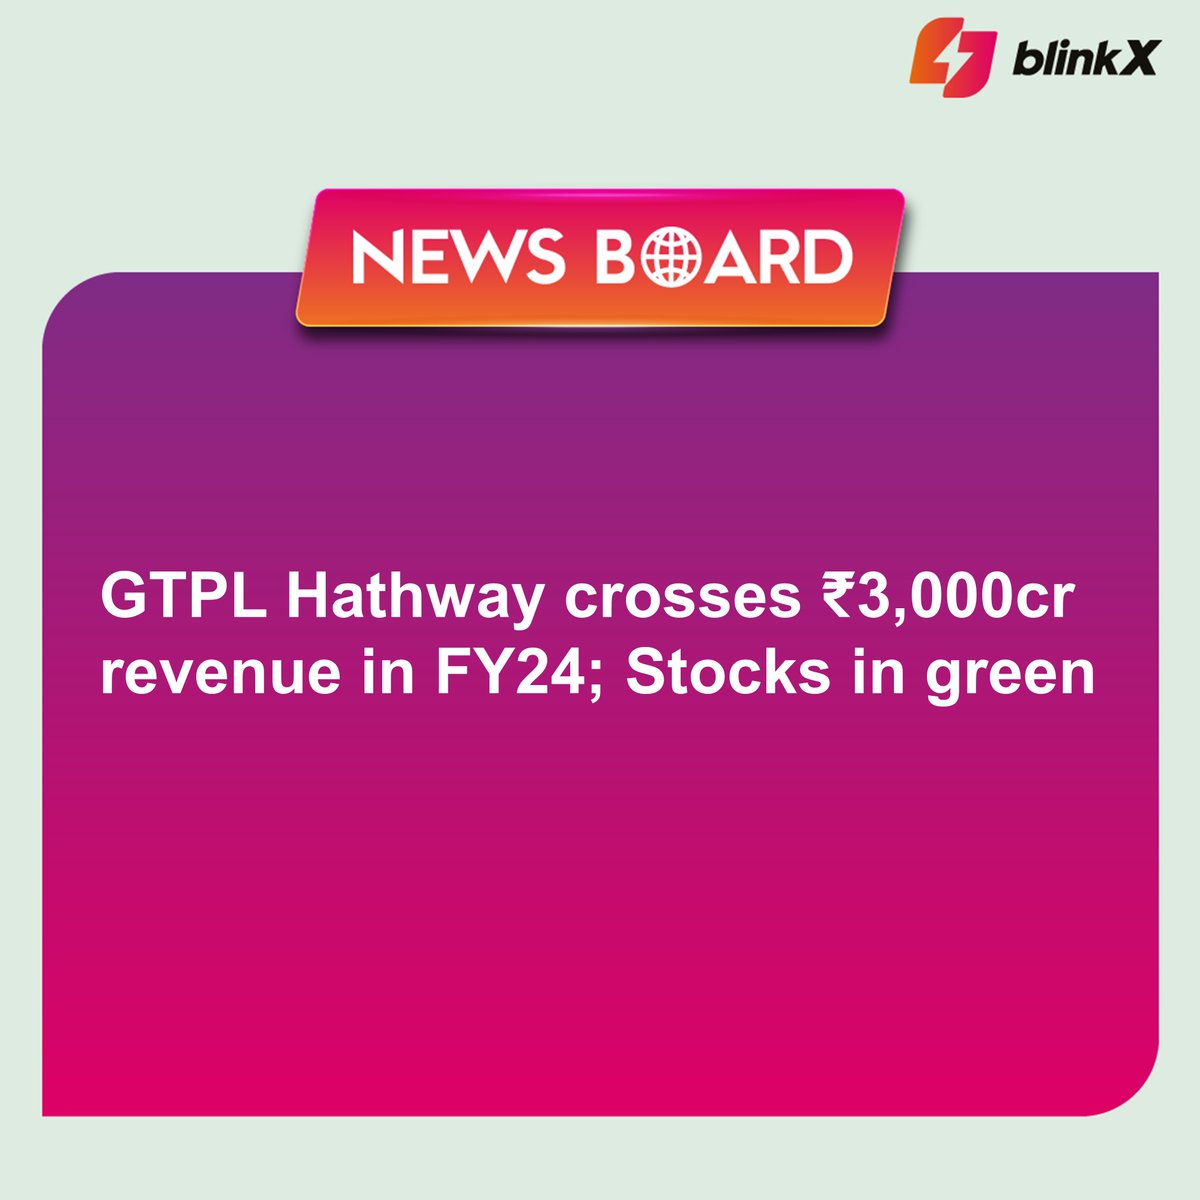 Anirudhsinh Jadeja, MD of GTPL Hathway Limited, highlighted significant achievements including gaining half a million digital cable TV subscribers and surpassing one million broadband subscribers.

#GTPLHathway #quarter #results #Q4FY24 #financialyear #FY24 #cable #digital